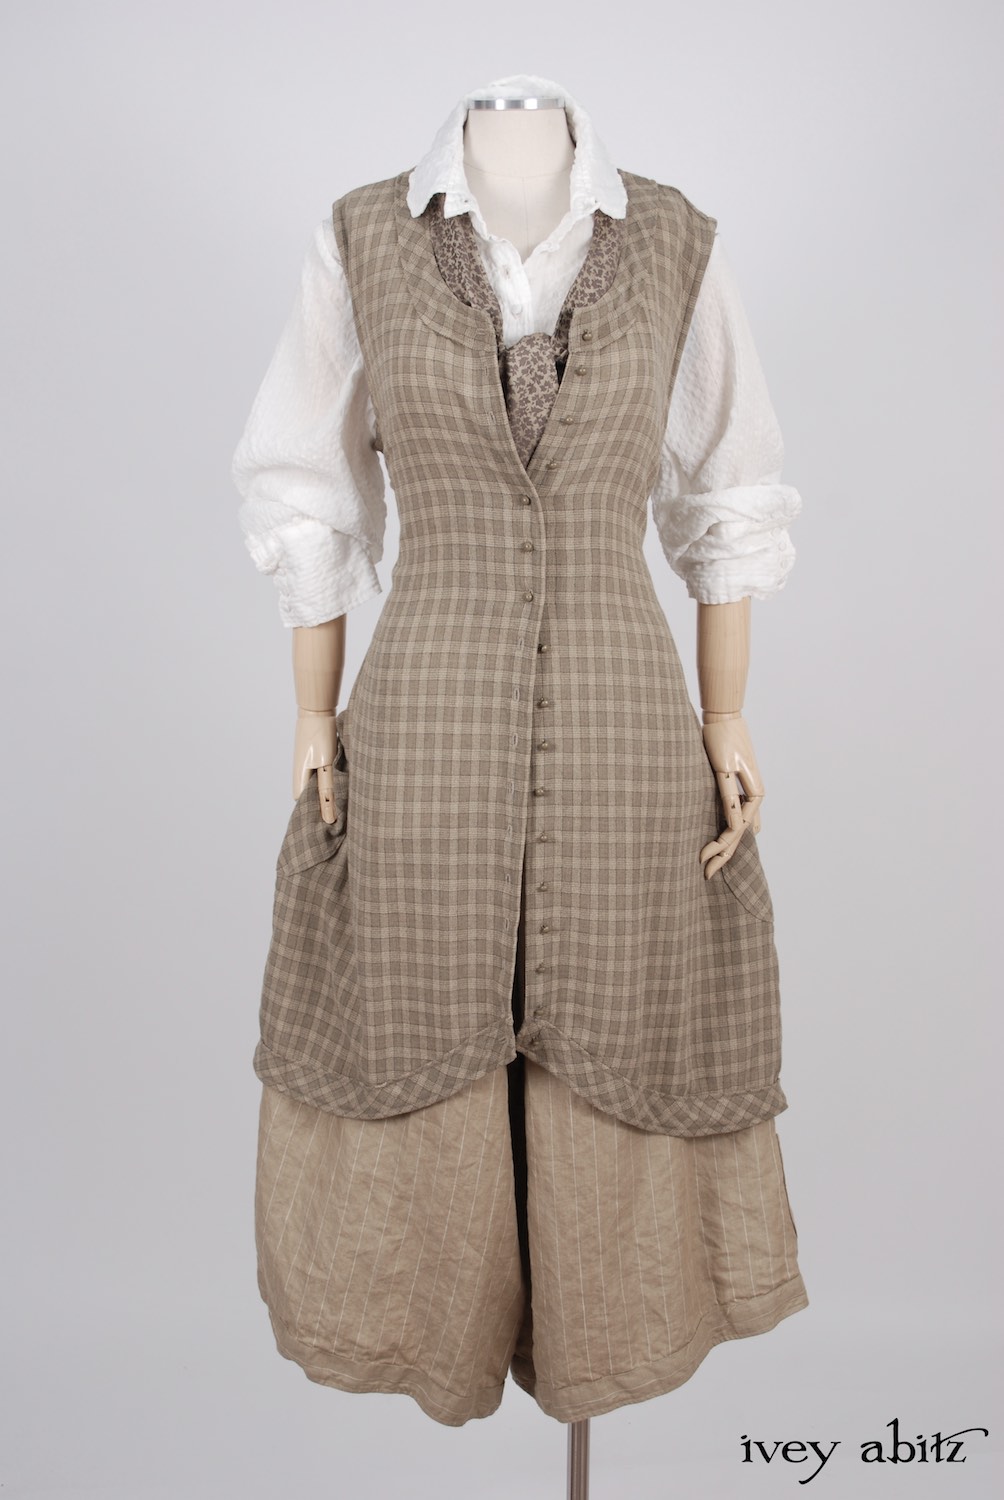 Ivey Abitz - Truitt Shirt in Dove Striped Voile  - Truitt Frock in Flaxseed Plaid Weave  - Holkham Hall Necktie in Flaxseed Leafy Silk Linen  - Montague Trousers in Sandy Pinstriped Linen, High Water Length